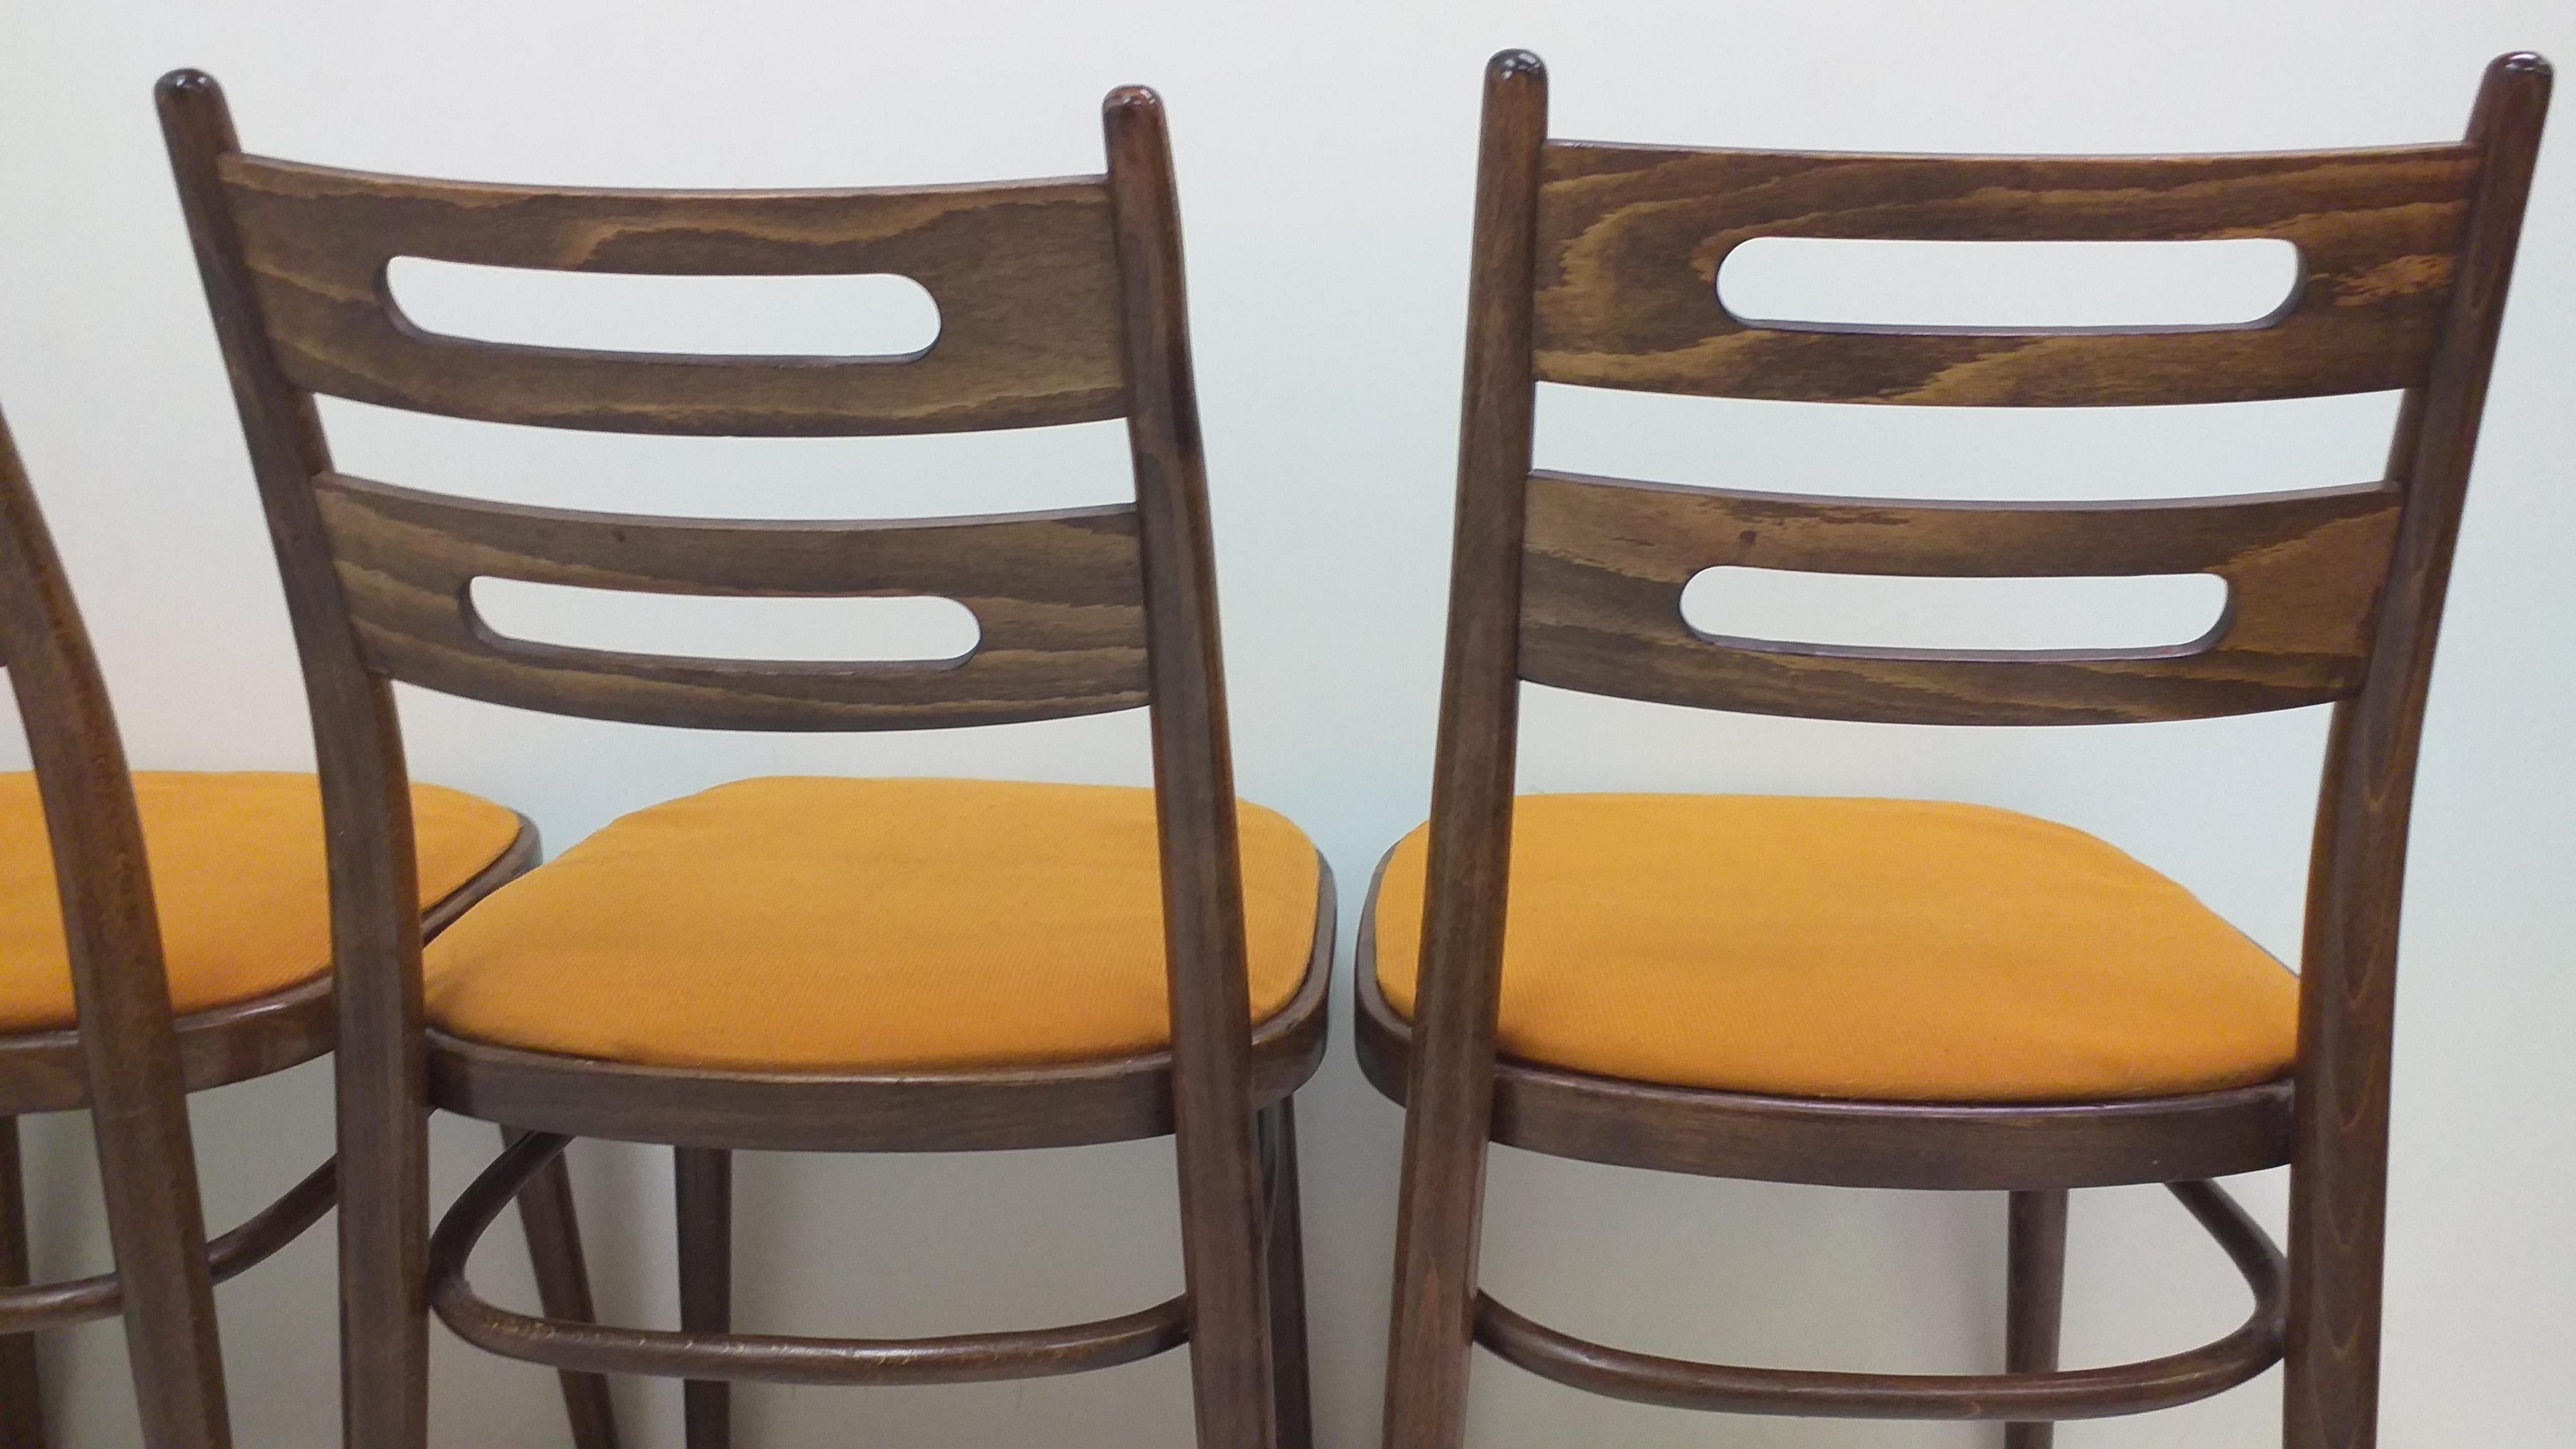 1960 4 Pieces of Ton Chairs, Czechoslovakia For Sale 1